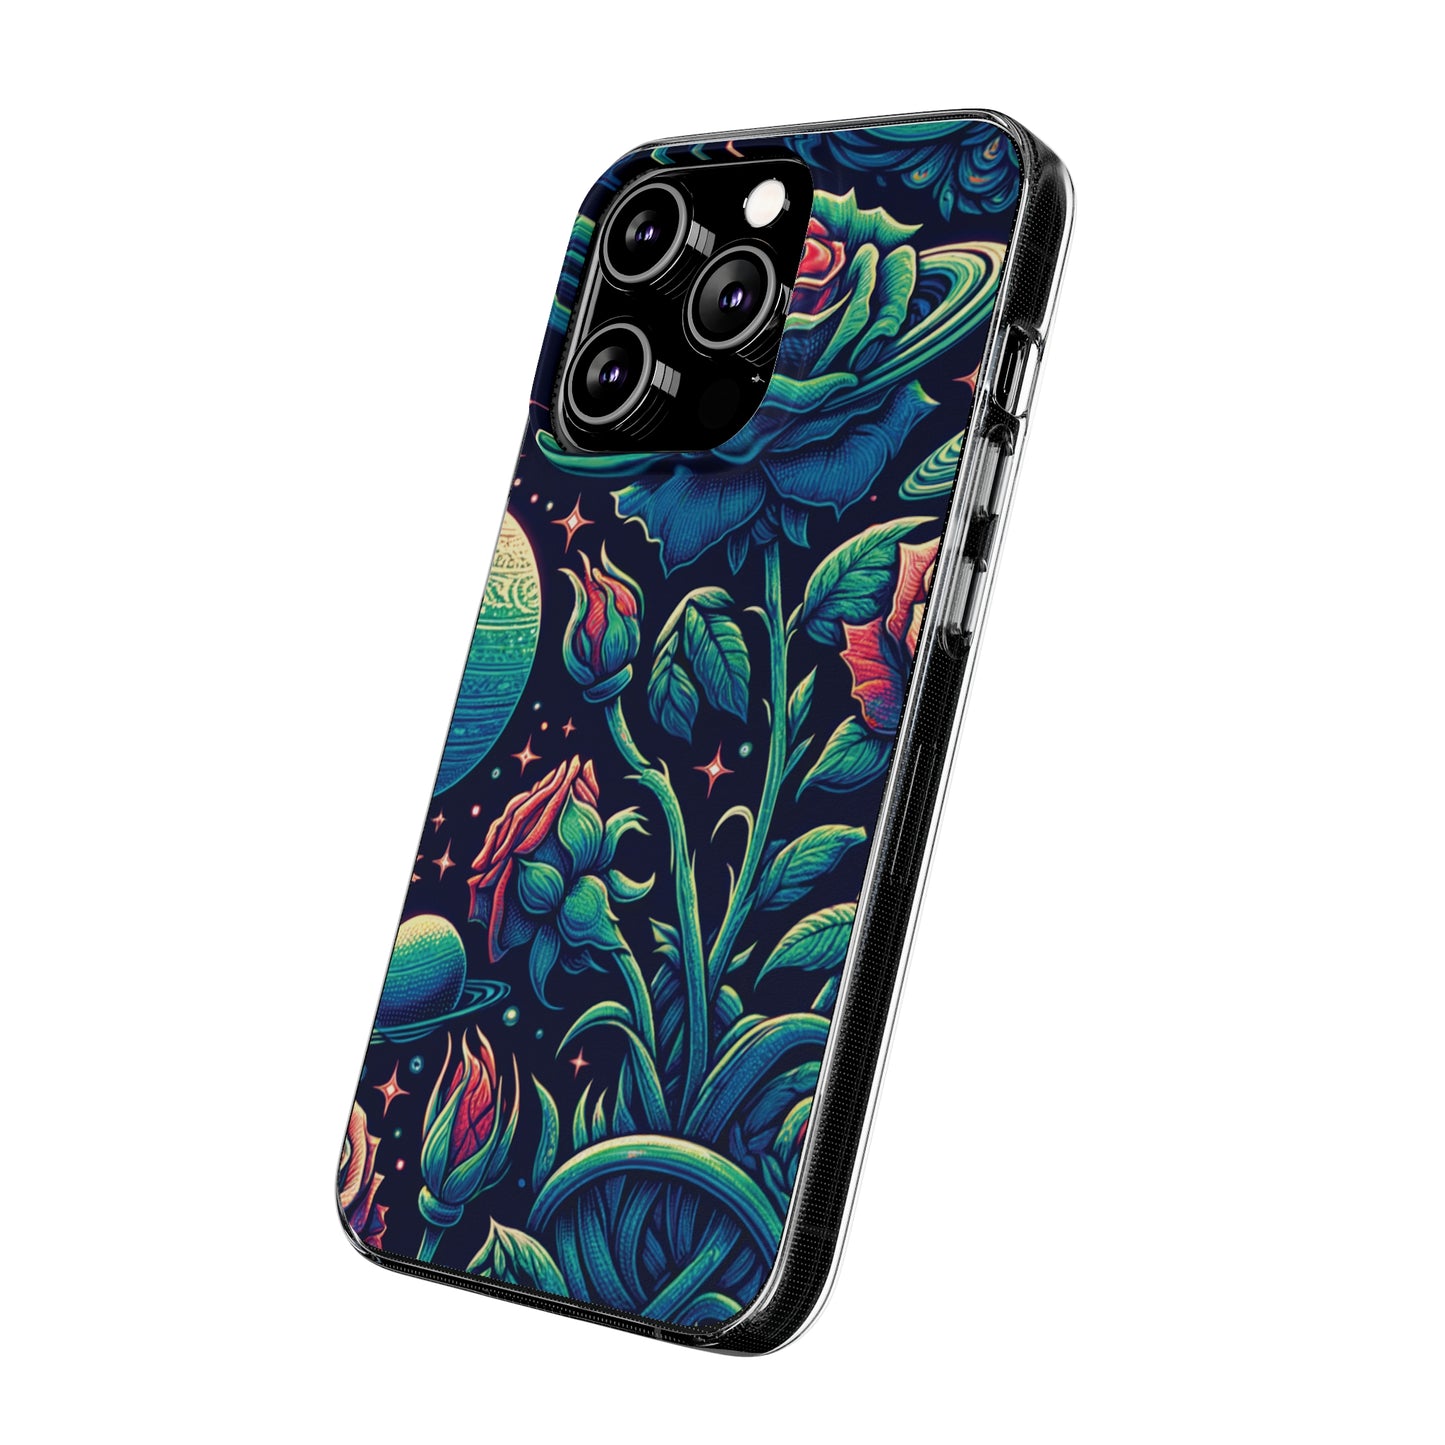 Space roses silicon phone case